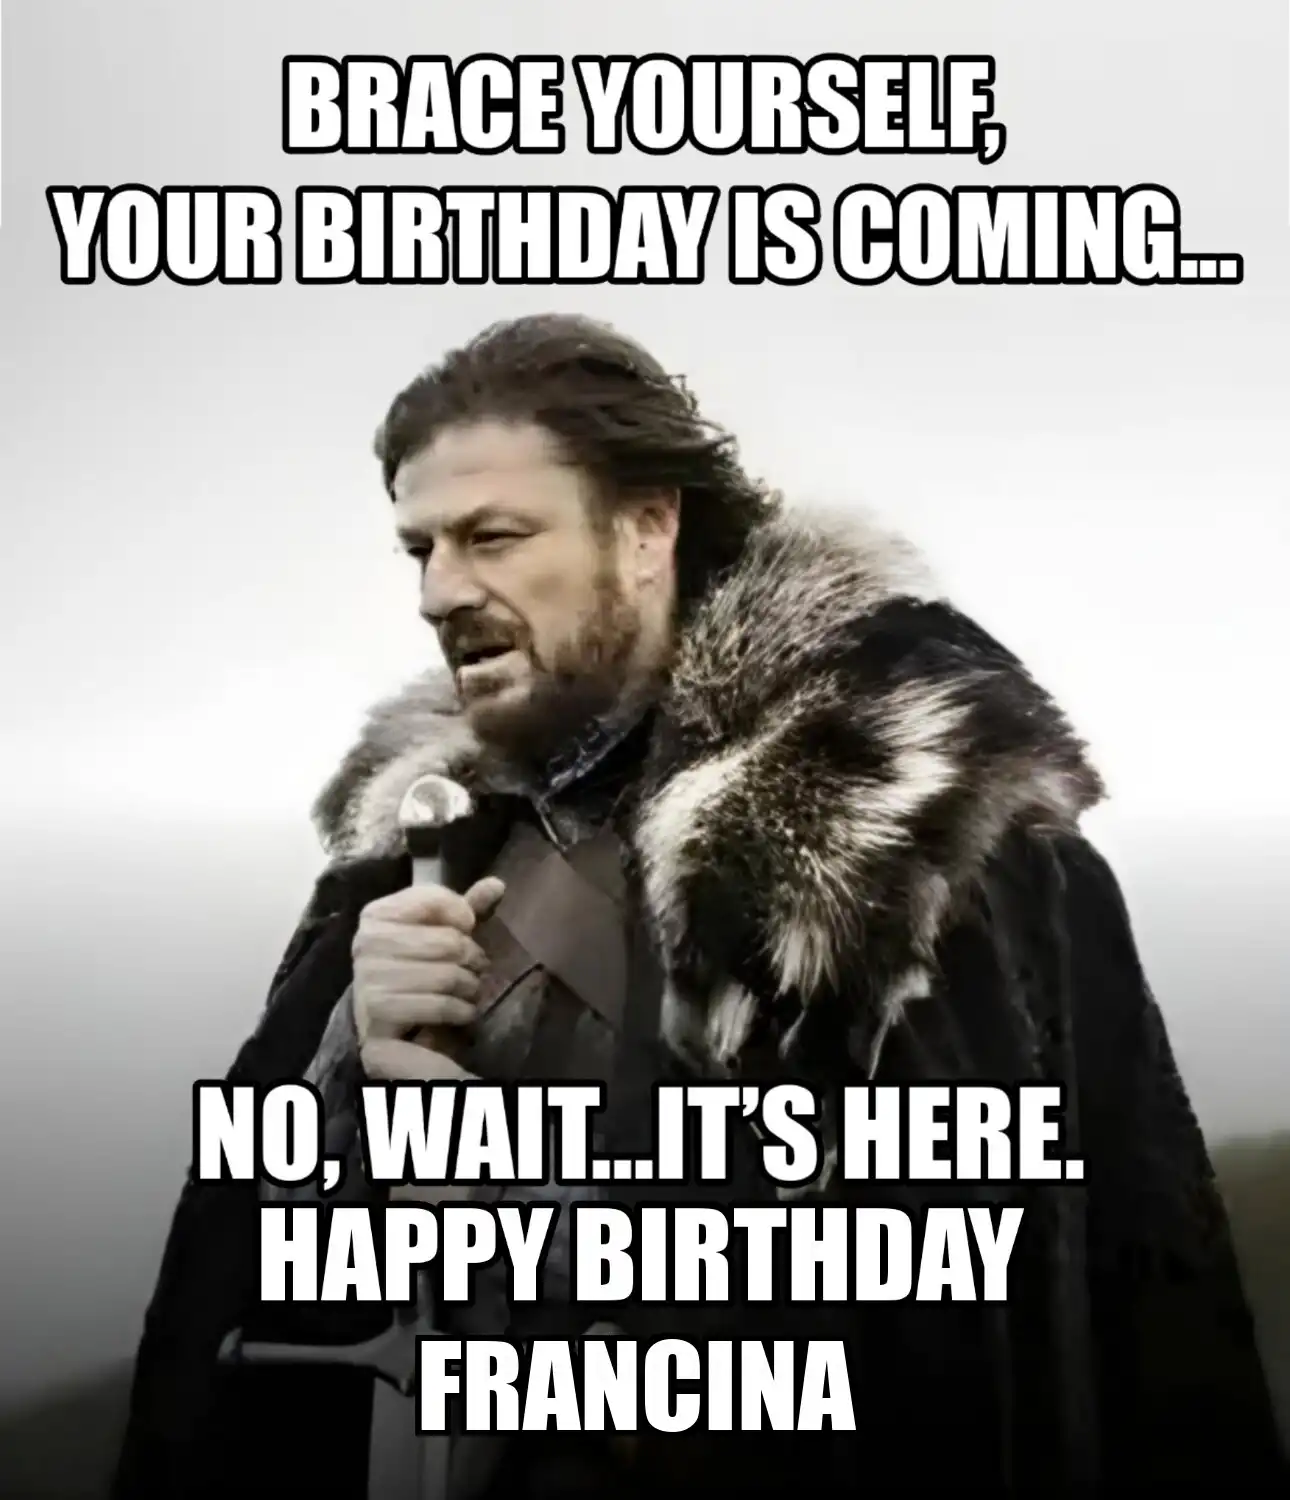 Happy Birthday Francina Brace Yourself Your Birthday Is Coming Meme